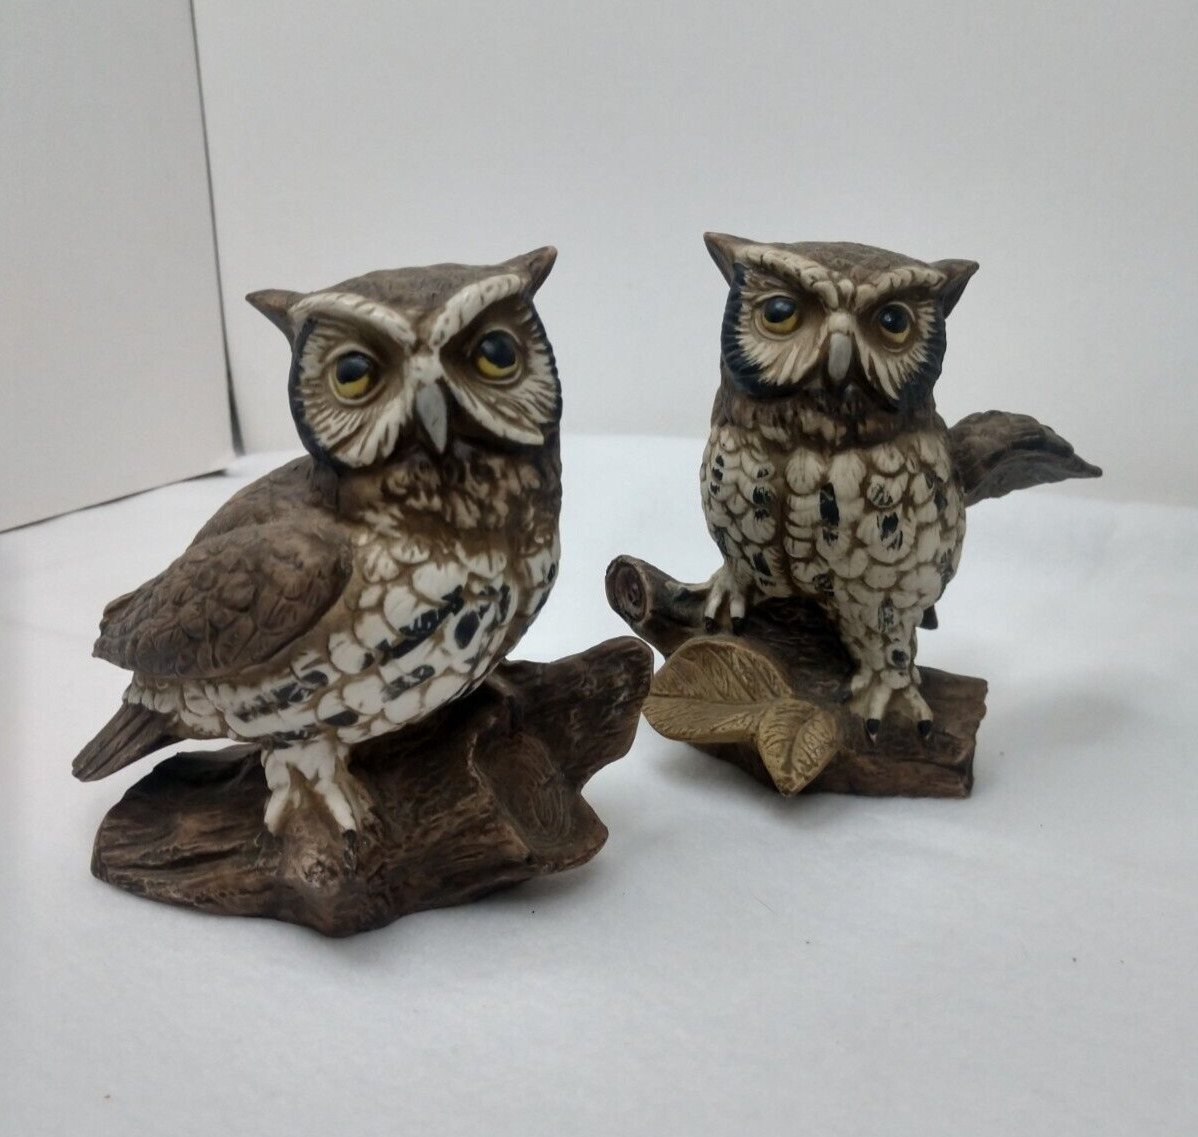 Ceramic Owl Pair Made by HOMCO in Taiwan 4.5 in MCM Vintage circa 1957- 1970\'s